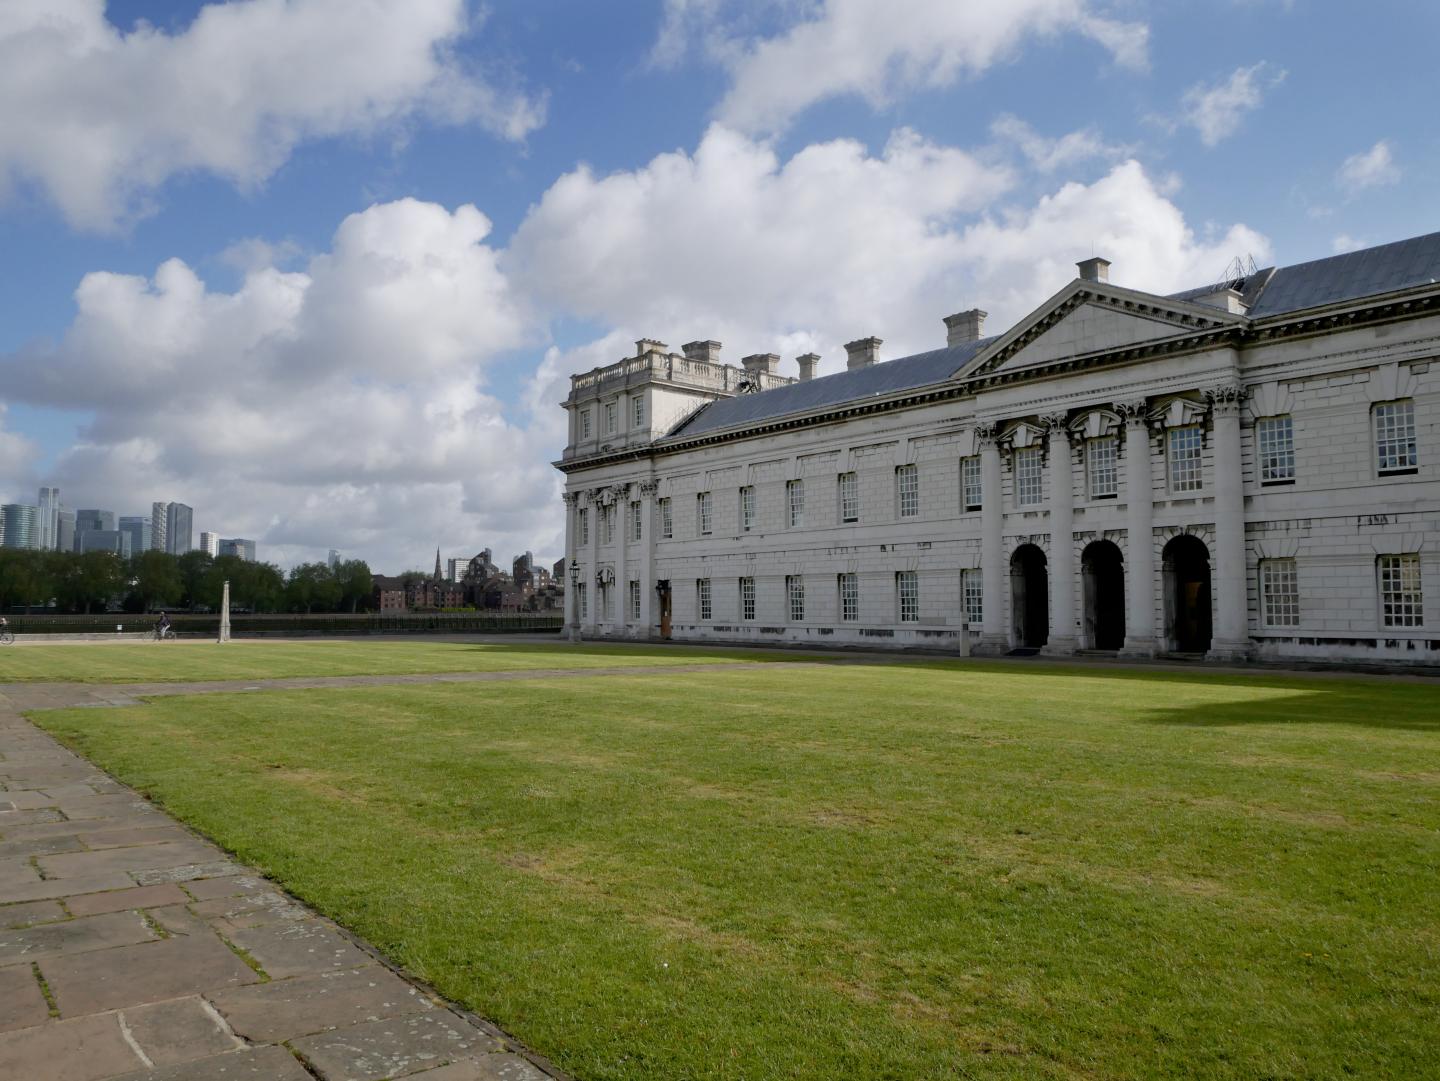 White building in Old Royal Naval College complex